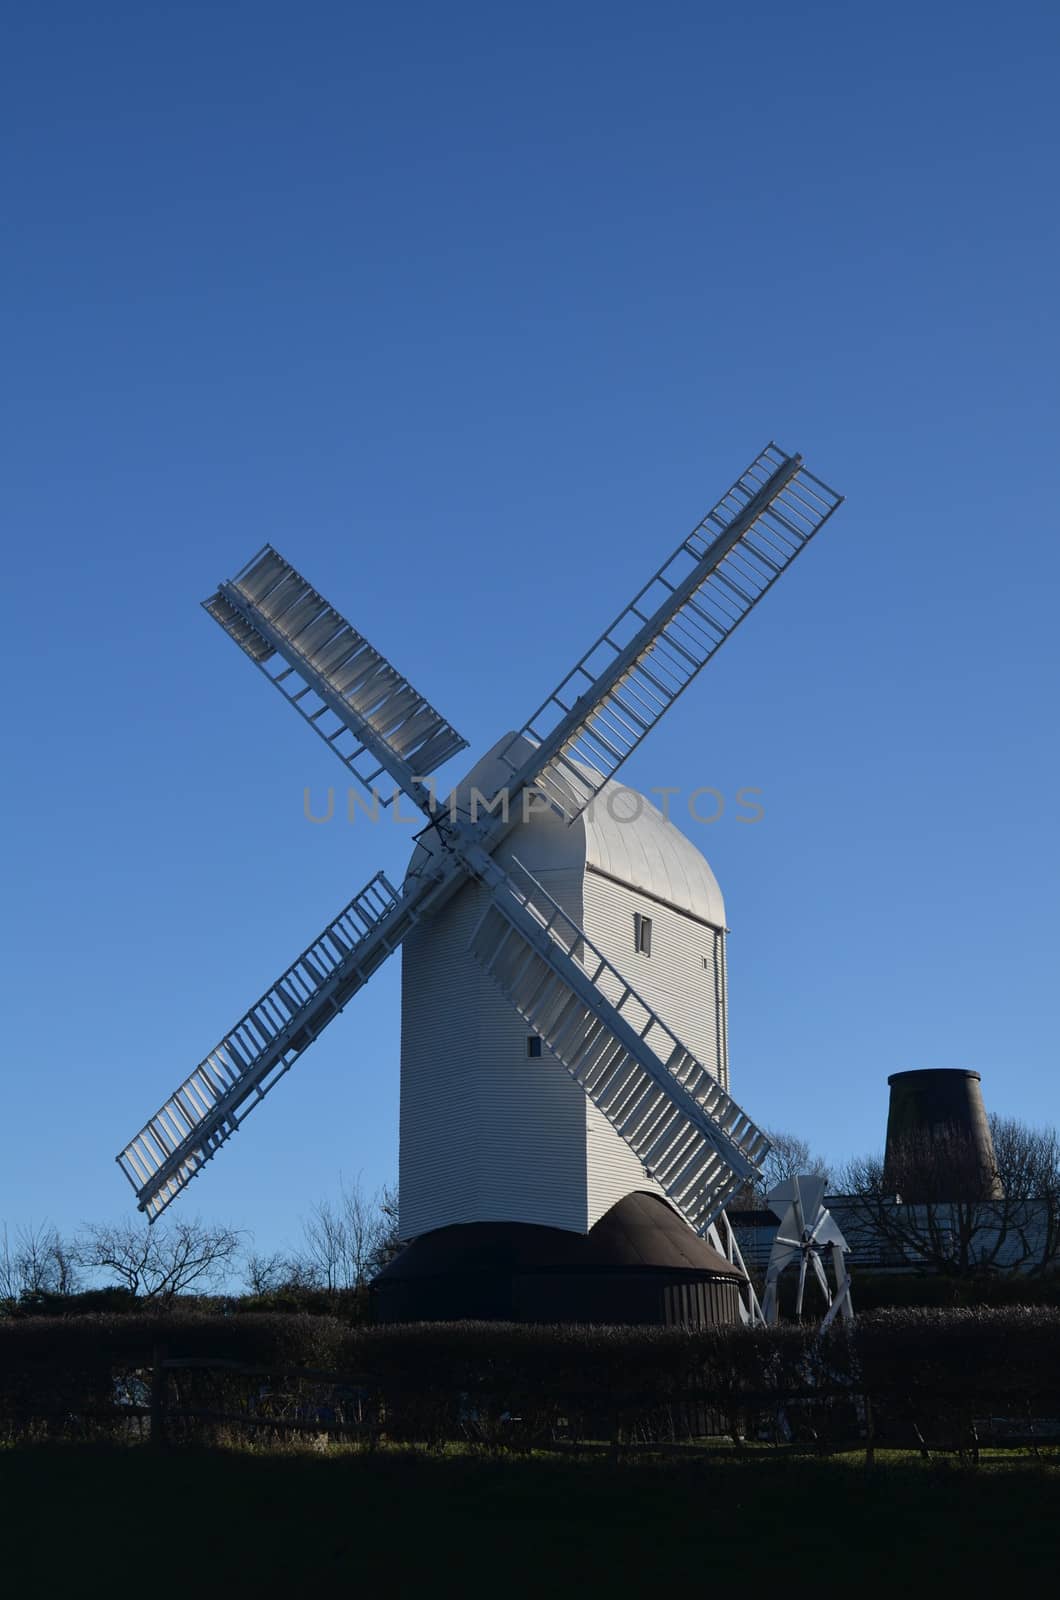 Old Sussex windmill built in 1821 and now fully restored is a famous landmark on Clayton Hill, Sussex, England. Known as Jill mill.